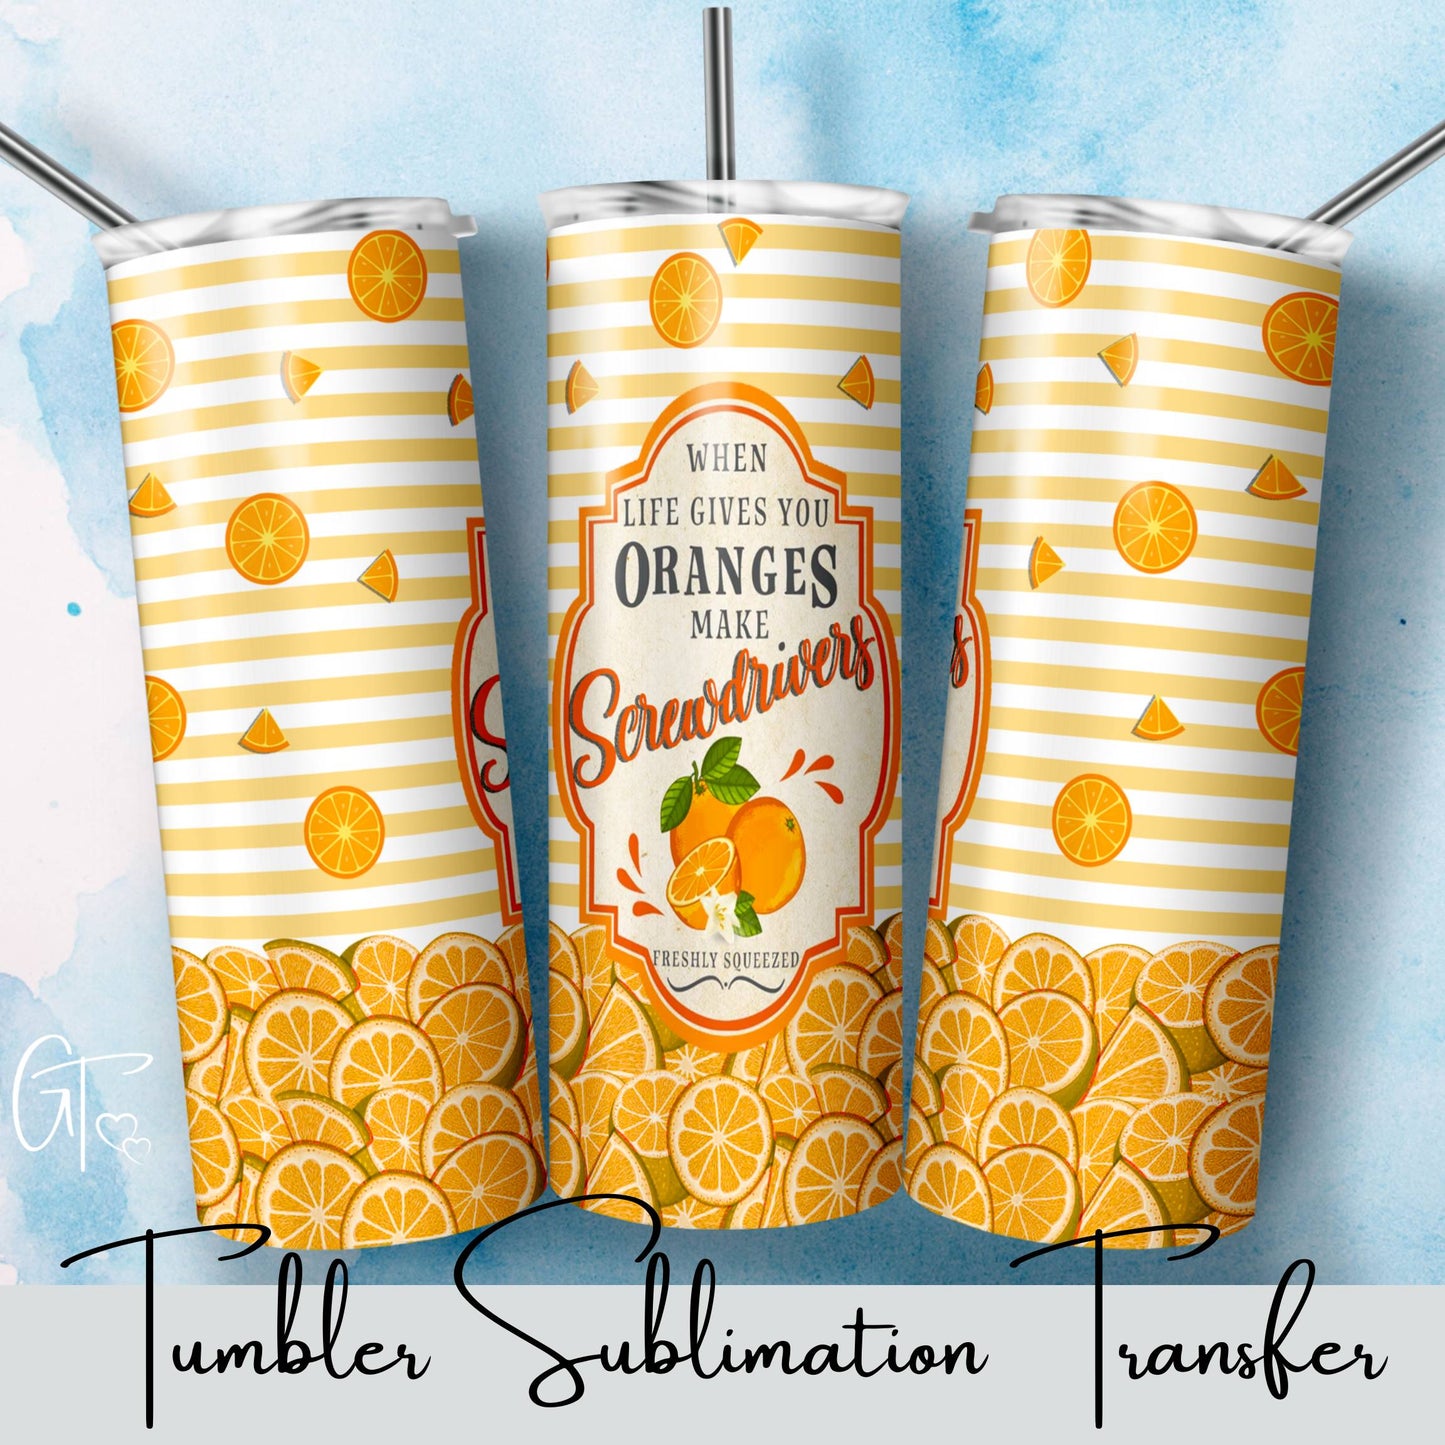 SUB1568 When life gives you Oranges make Screwdrivers Tumbler Sublimation Transfer